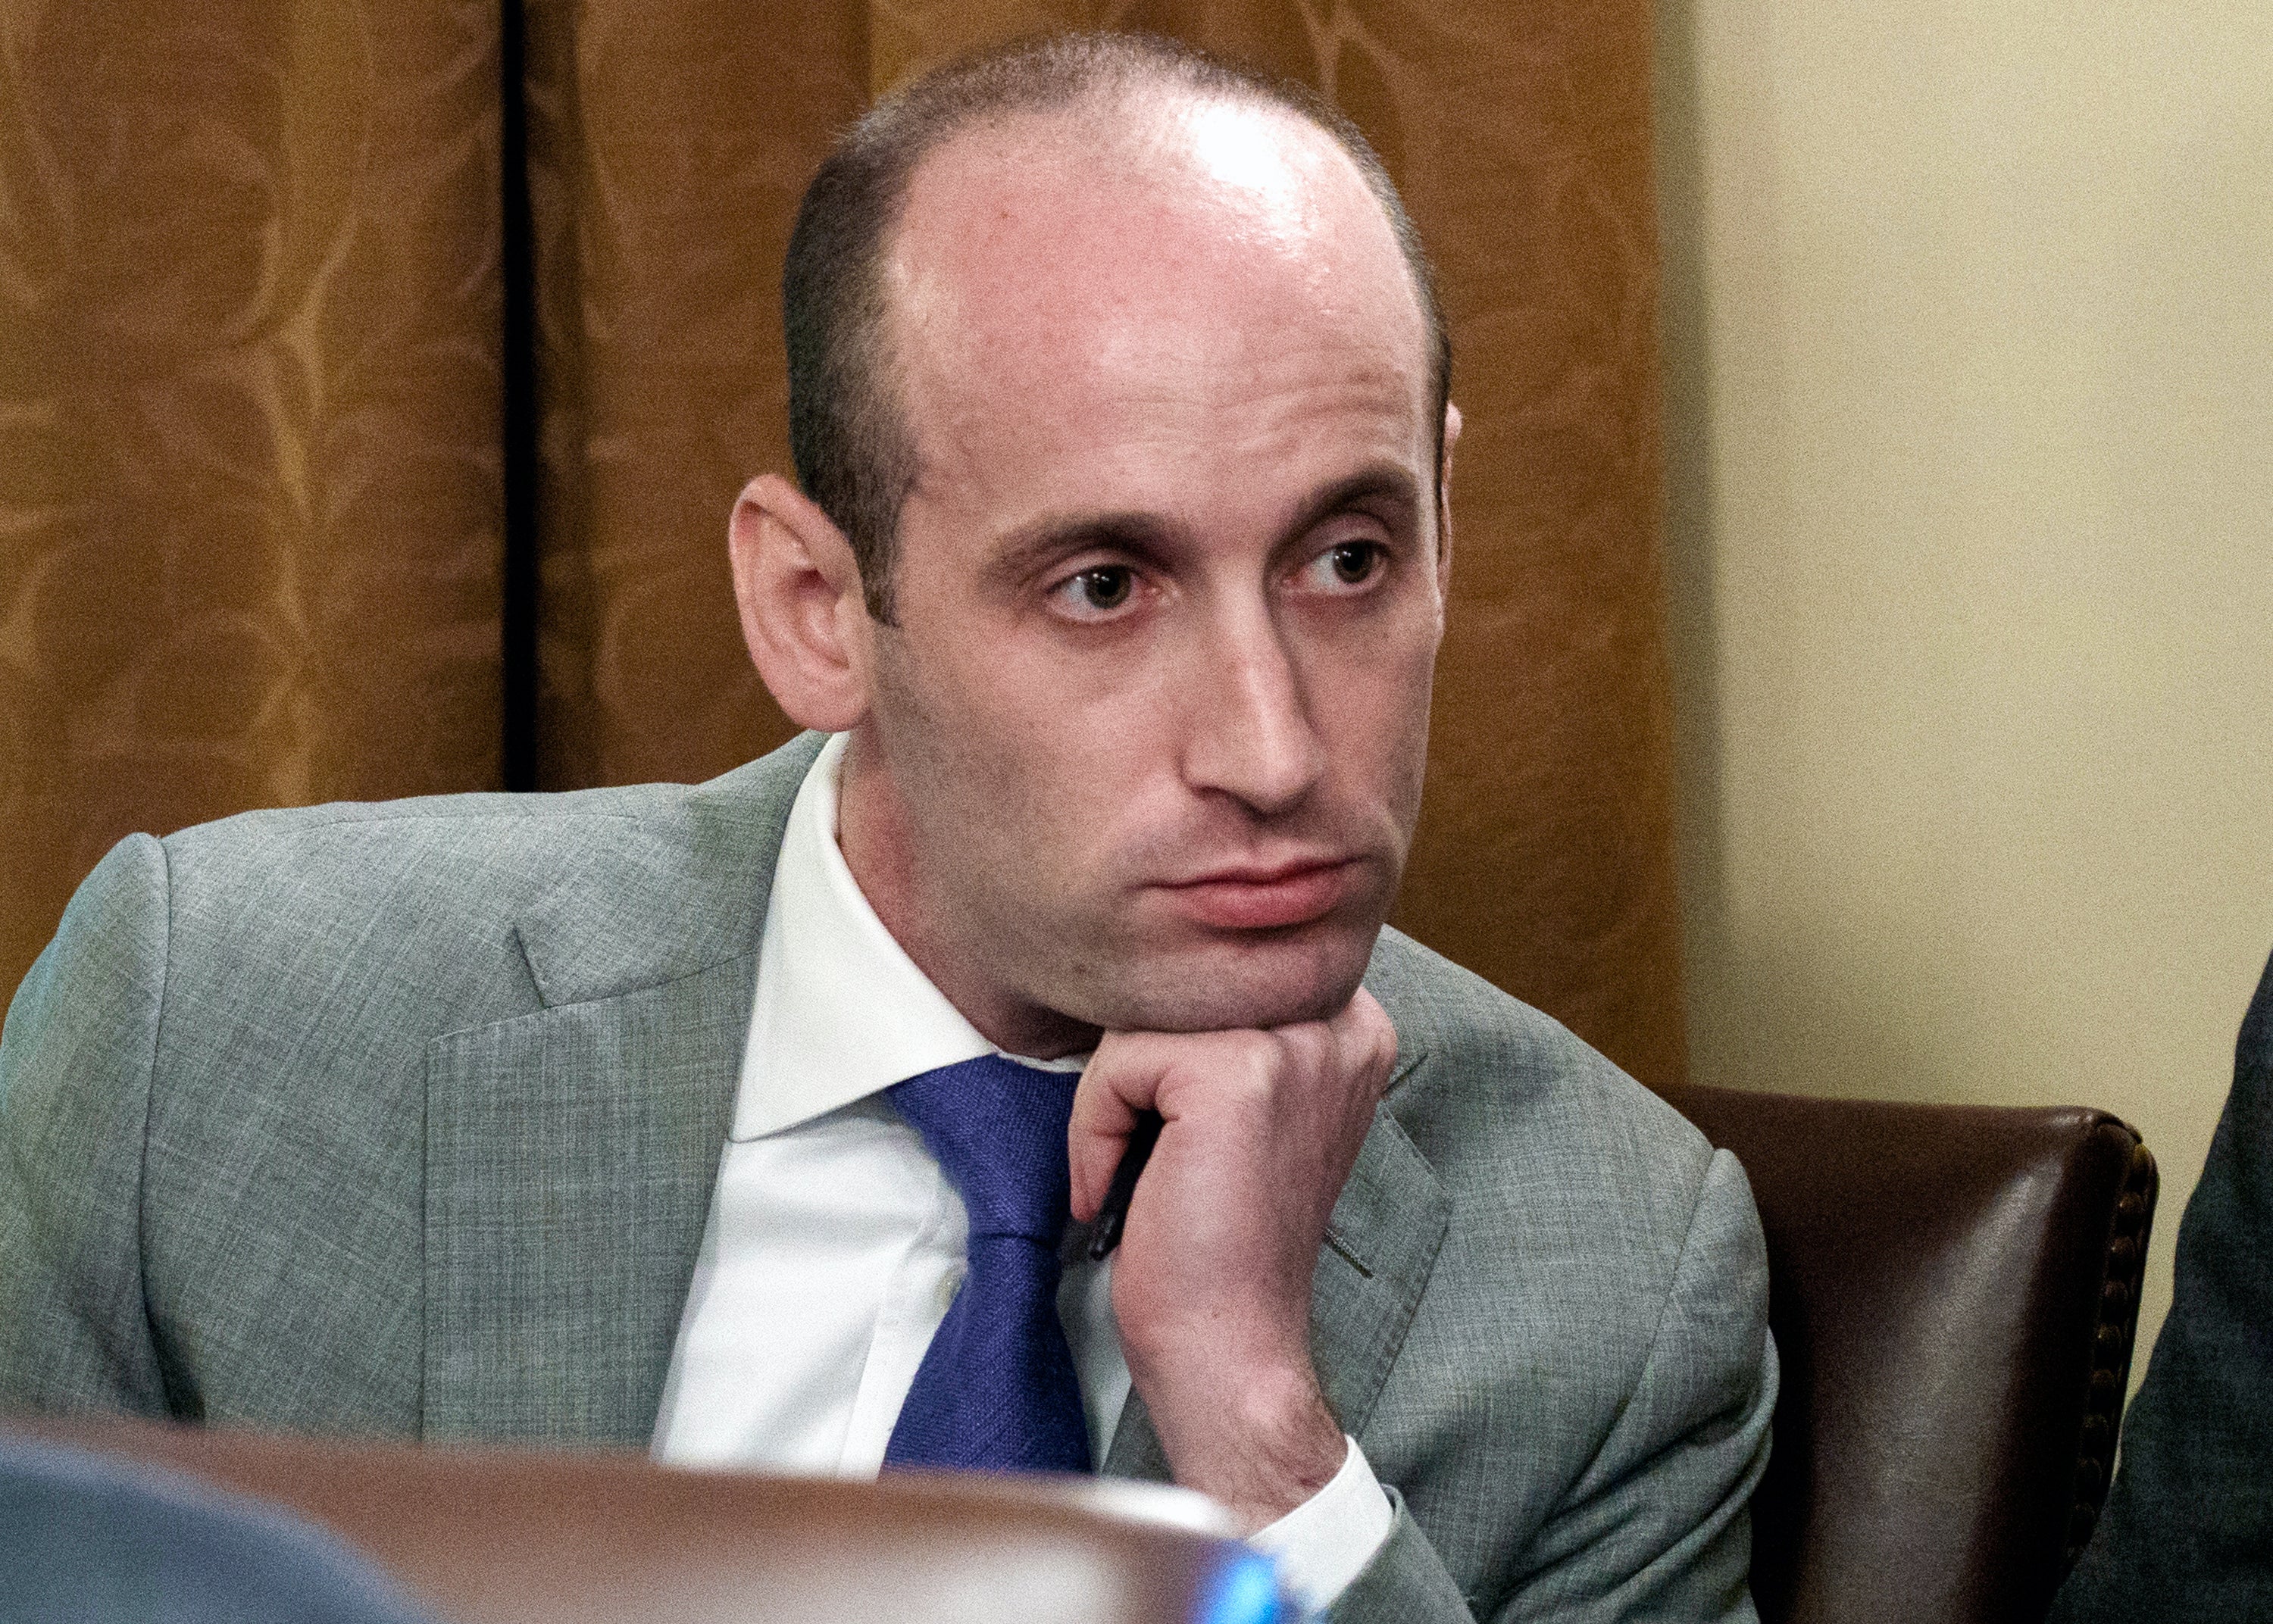 Stephen Miller has been subpoenaed to appear before a federal grand jury